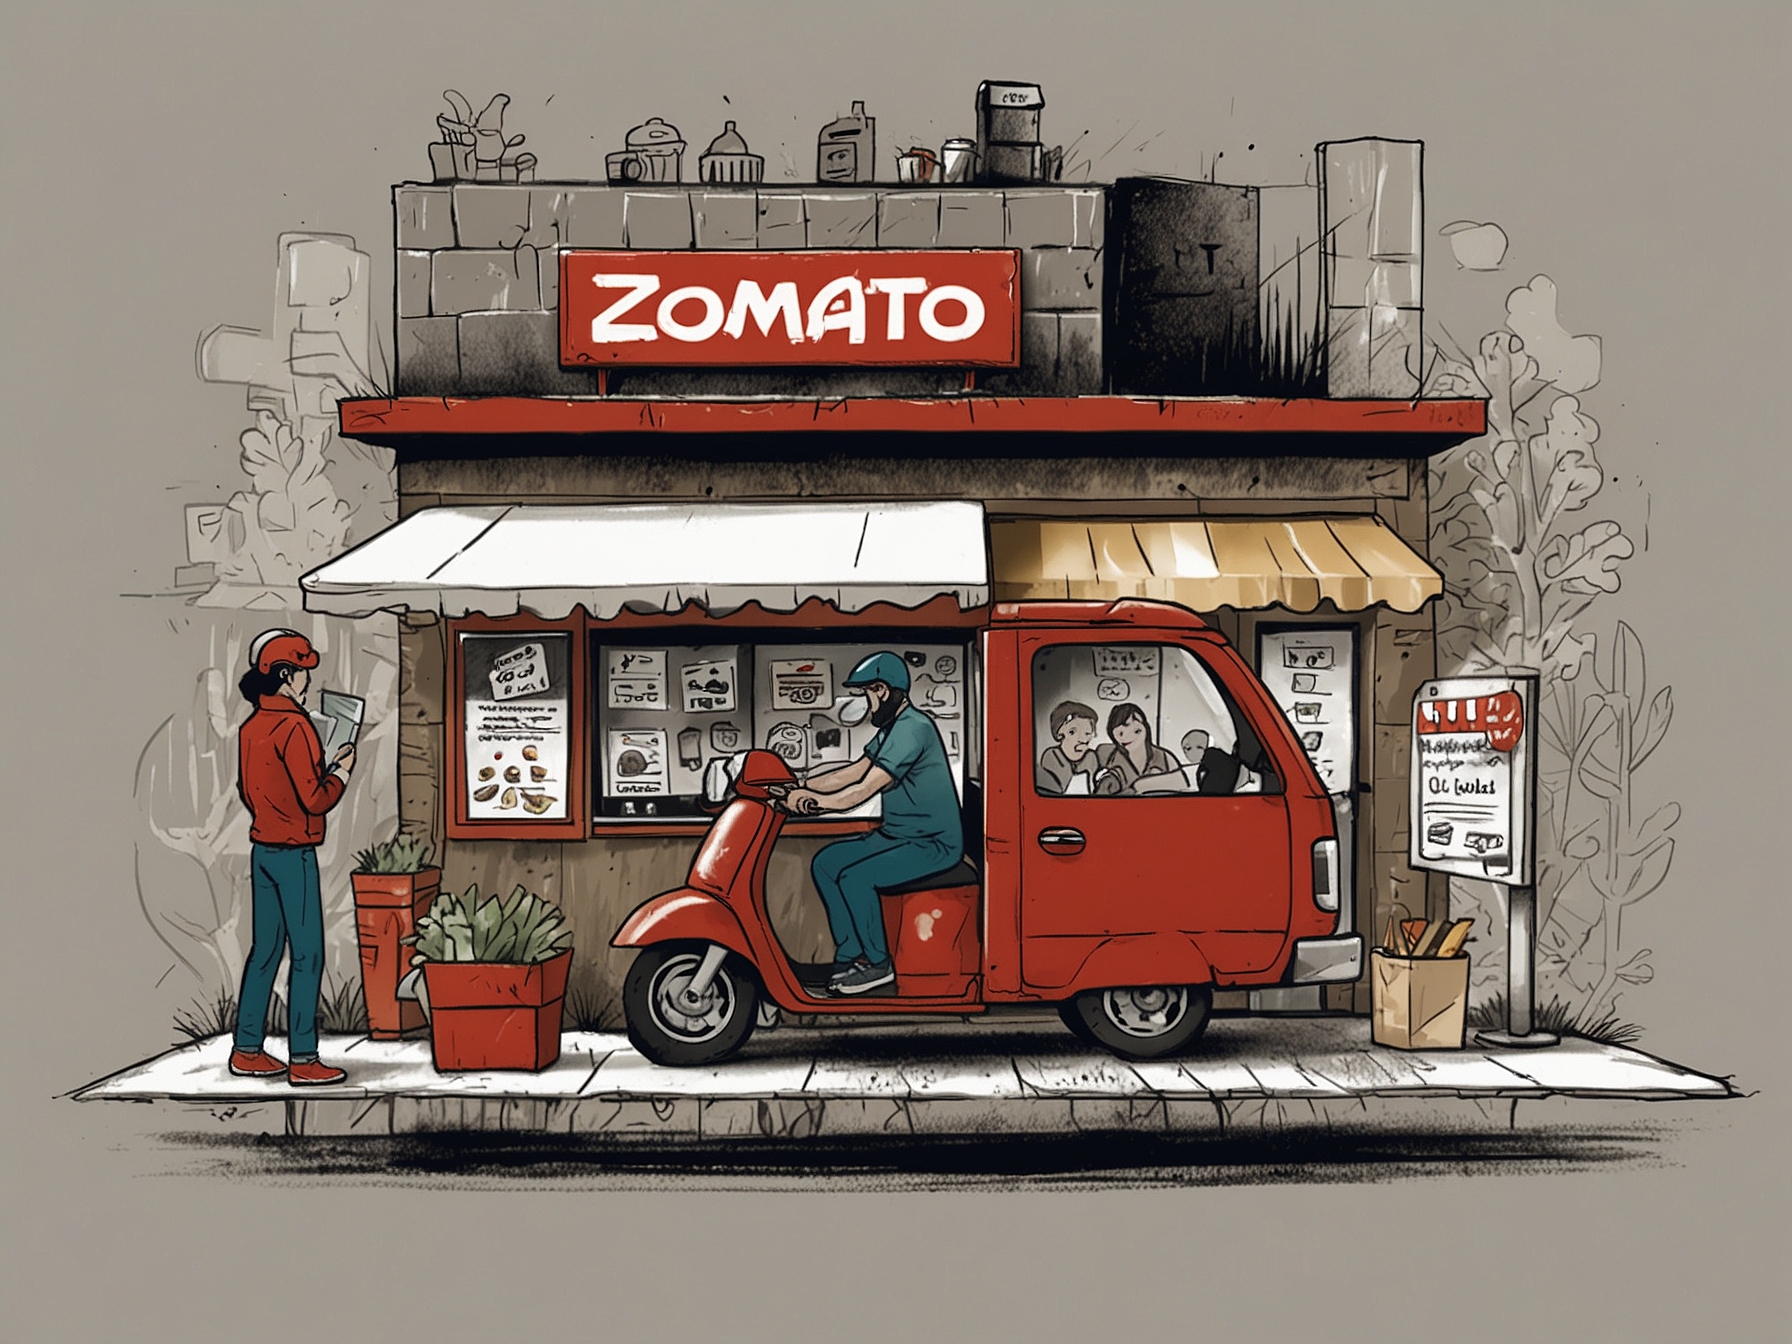 A conceptual graphic showing the integration of food delivery and ticket booking services, depicting Zomato's strategy to become a unified lifestyle platform with diverse offerings.